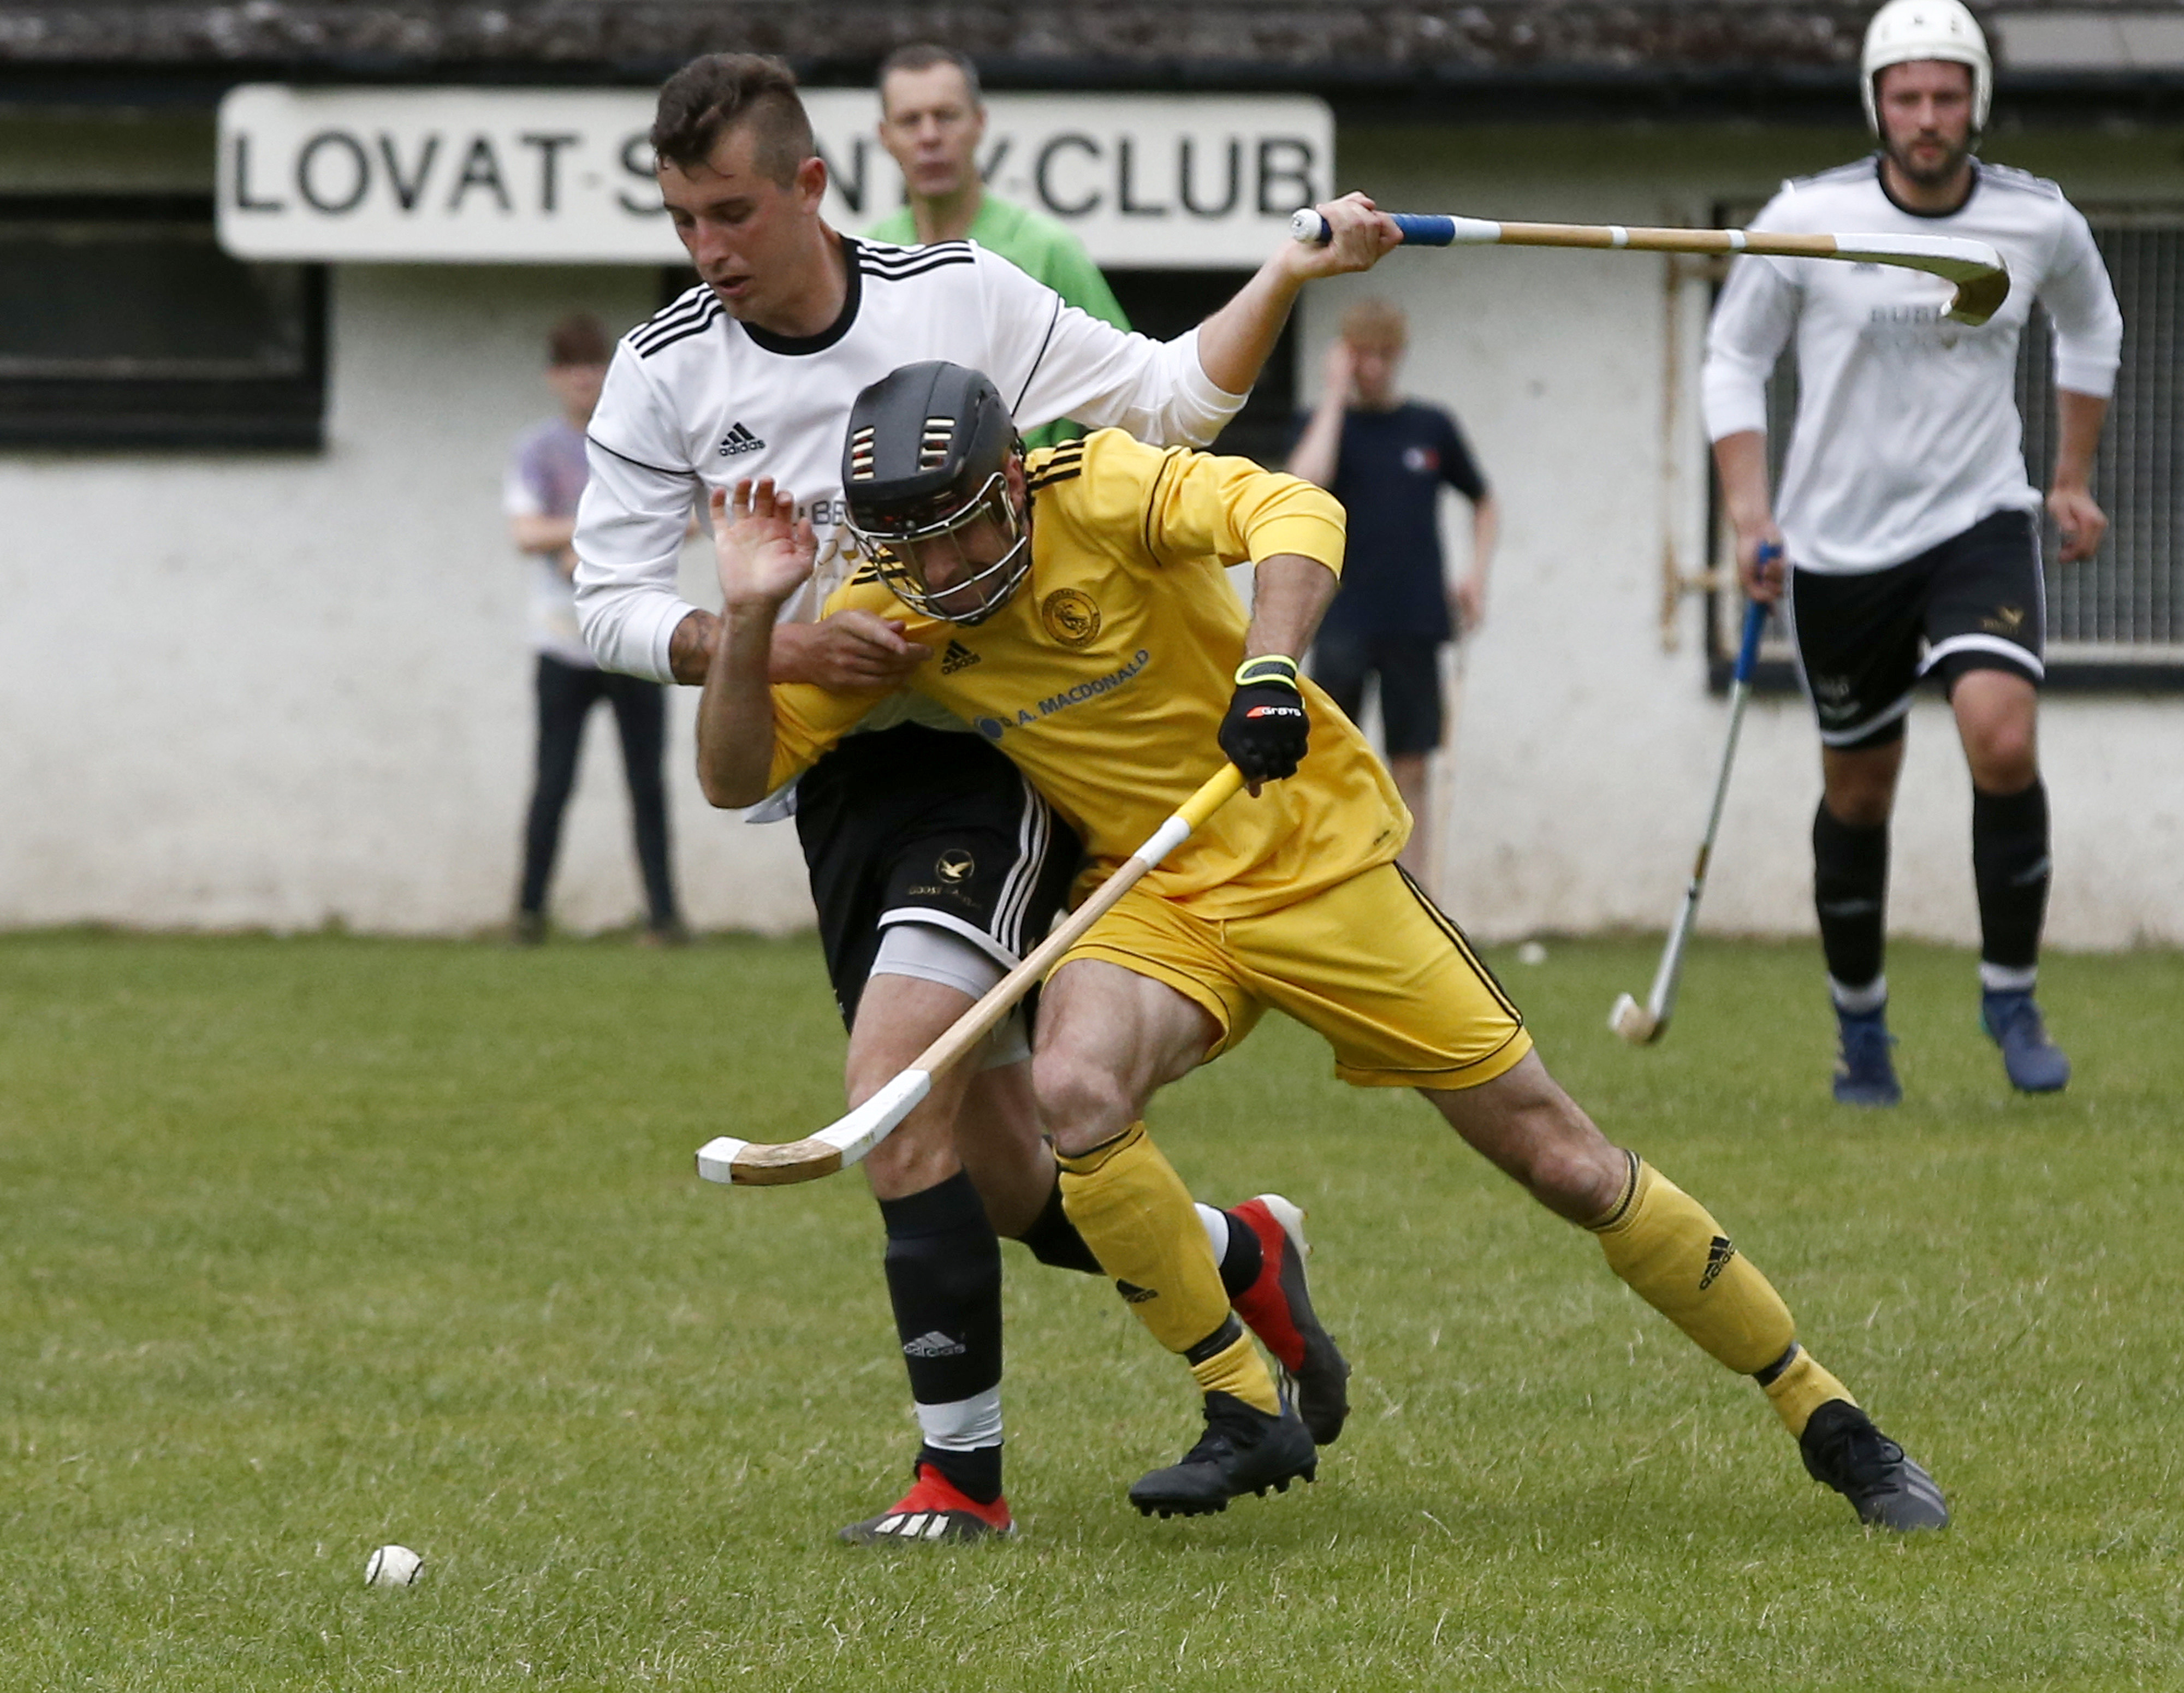 Inveraray pipped by second half Lovat performance